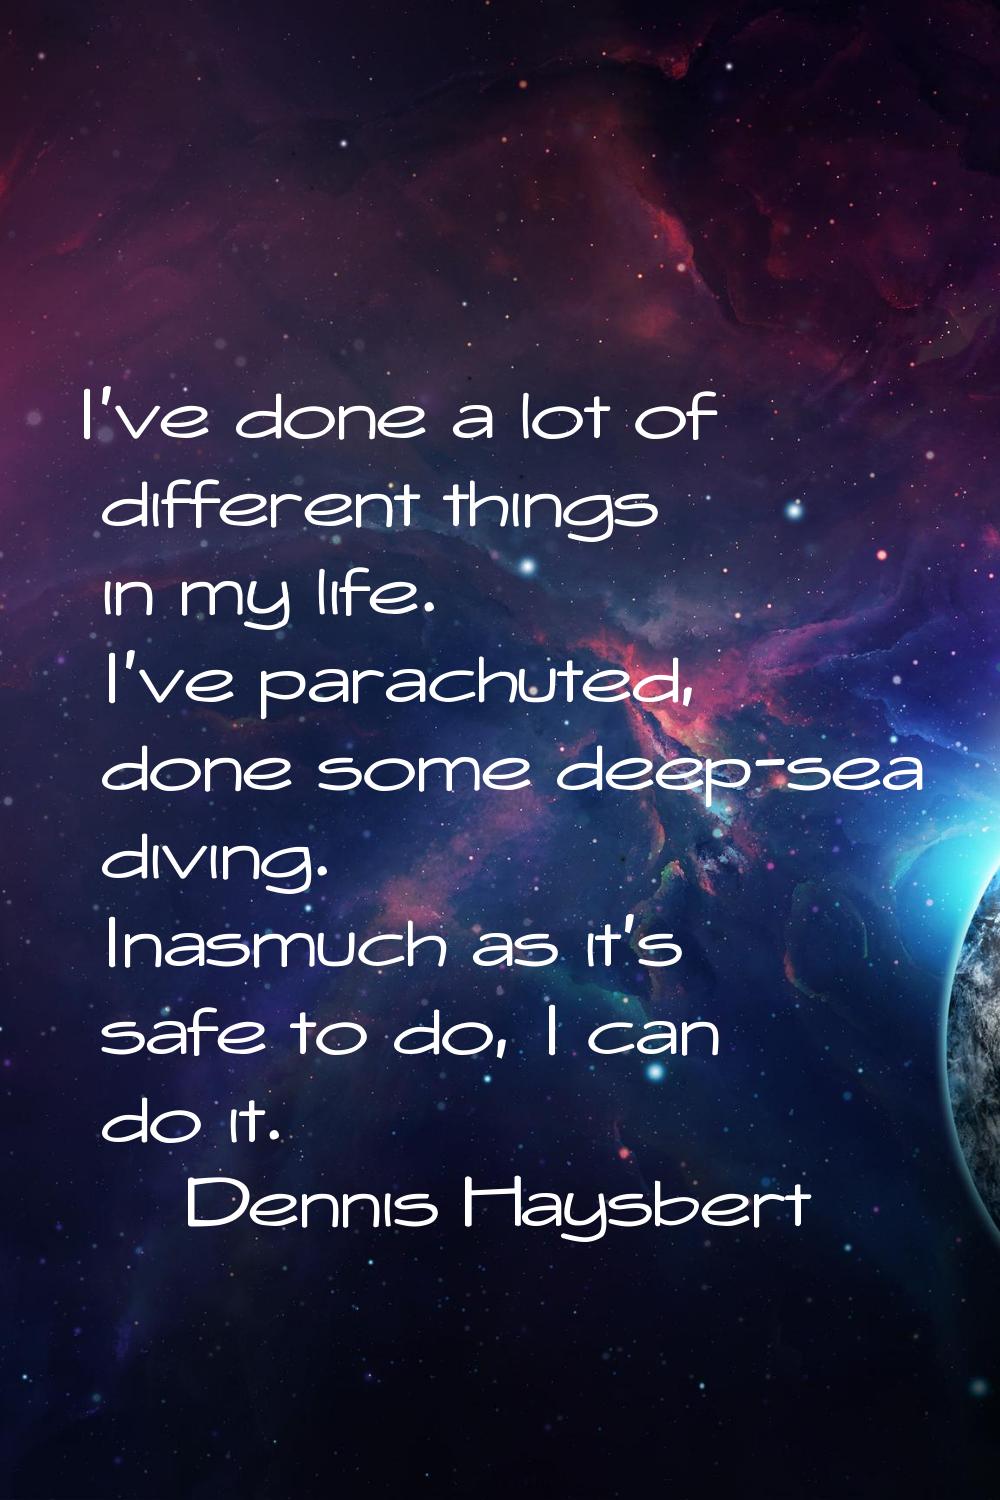 I've done a lot of different things in my life. I've parachuted, done some deep-sea diving. Inasmuc